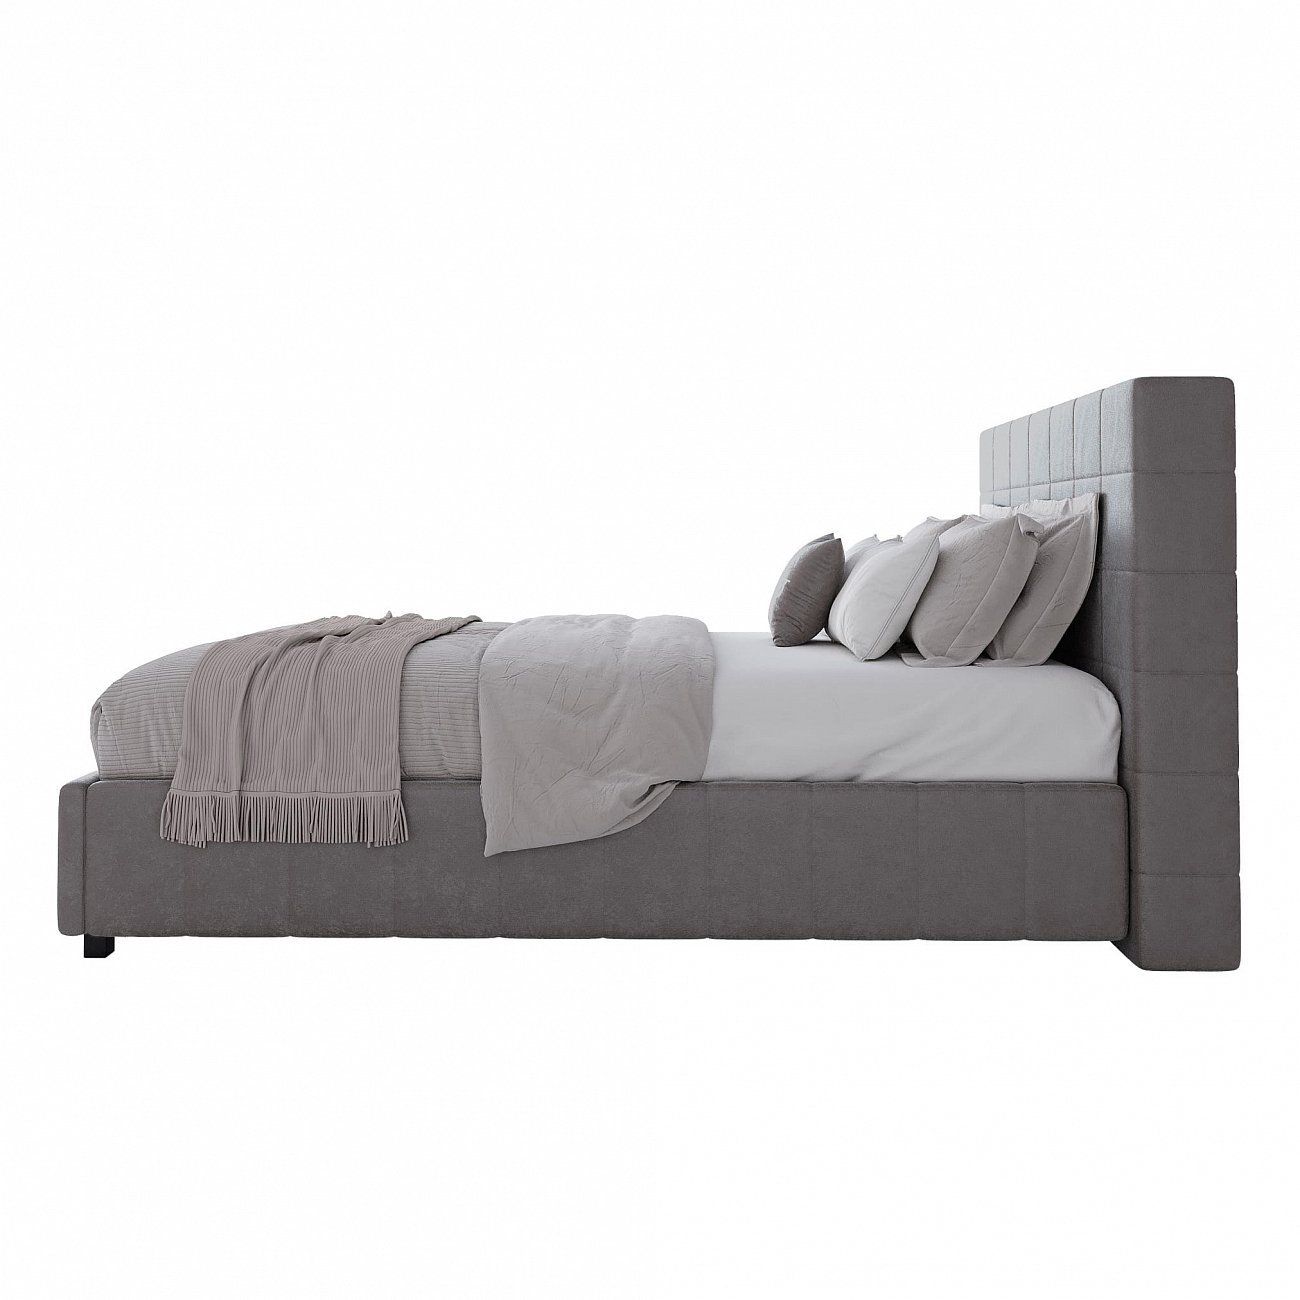 Teenage bed with a soft backrest 140x200 cm gray-beige Shining Modern